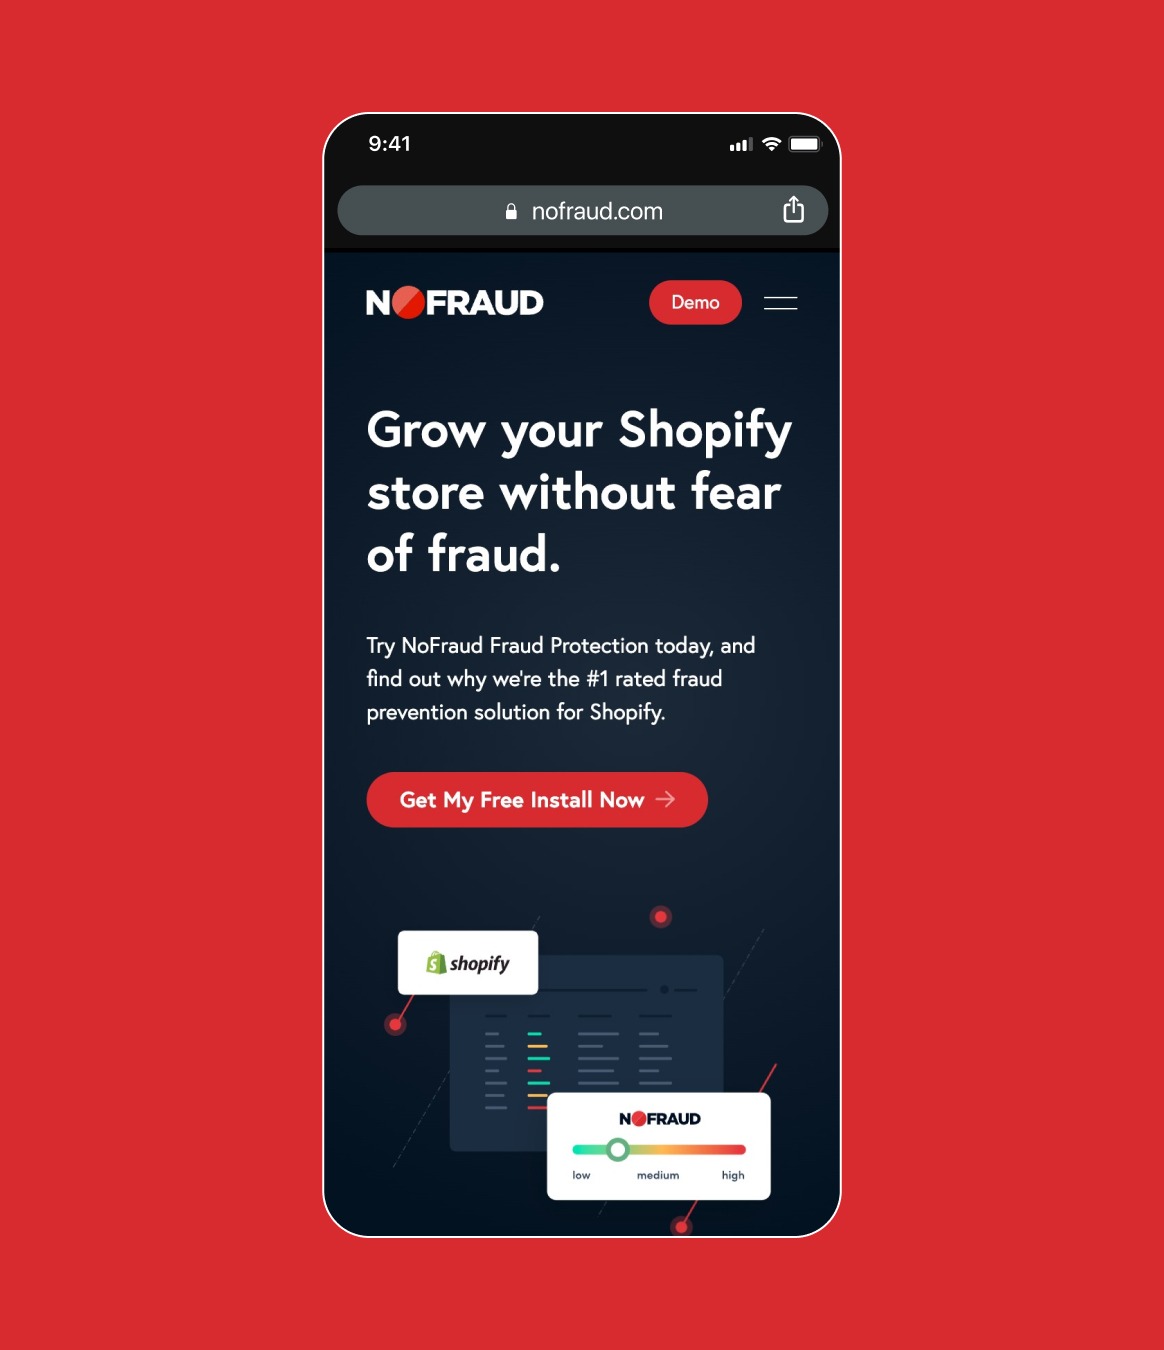 Responsive layout for the NoFraud website shown on a mobile phone